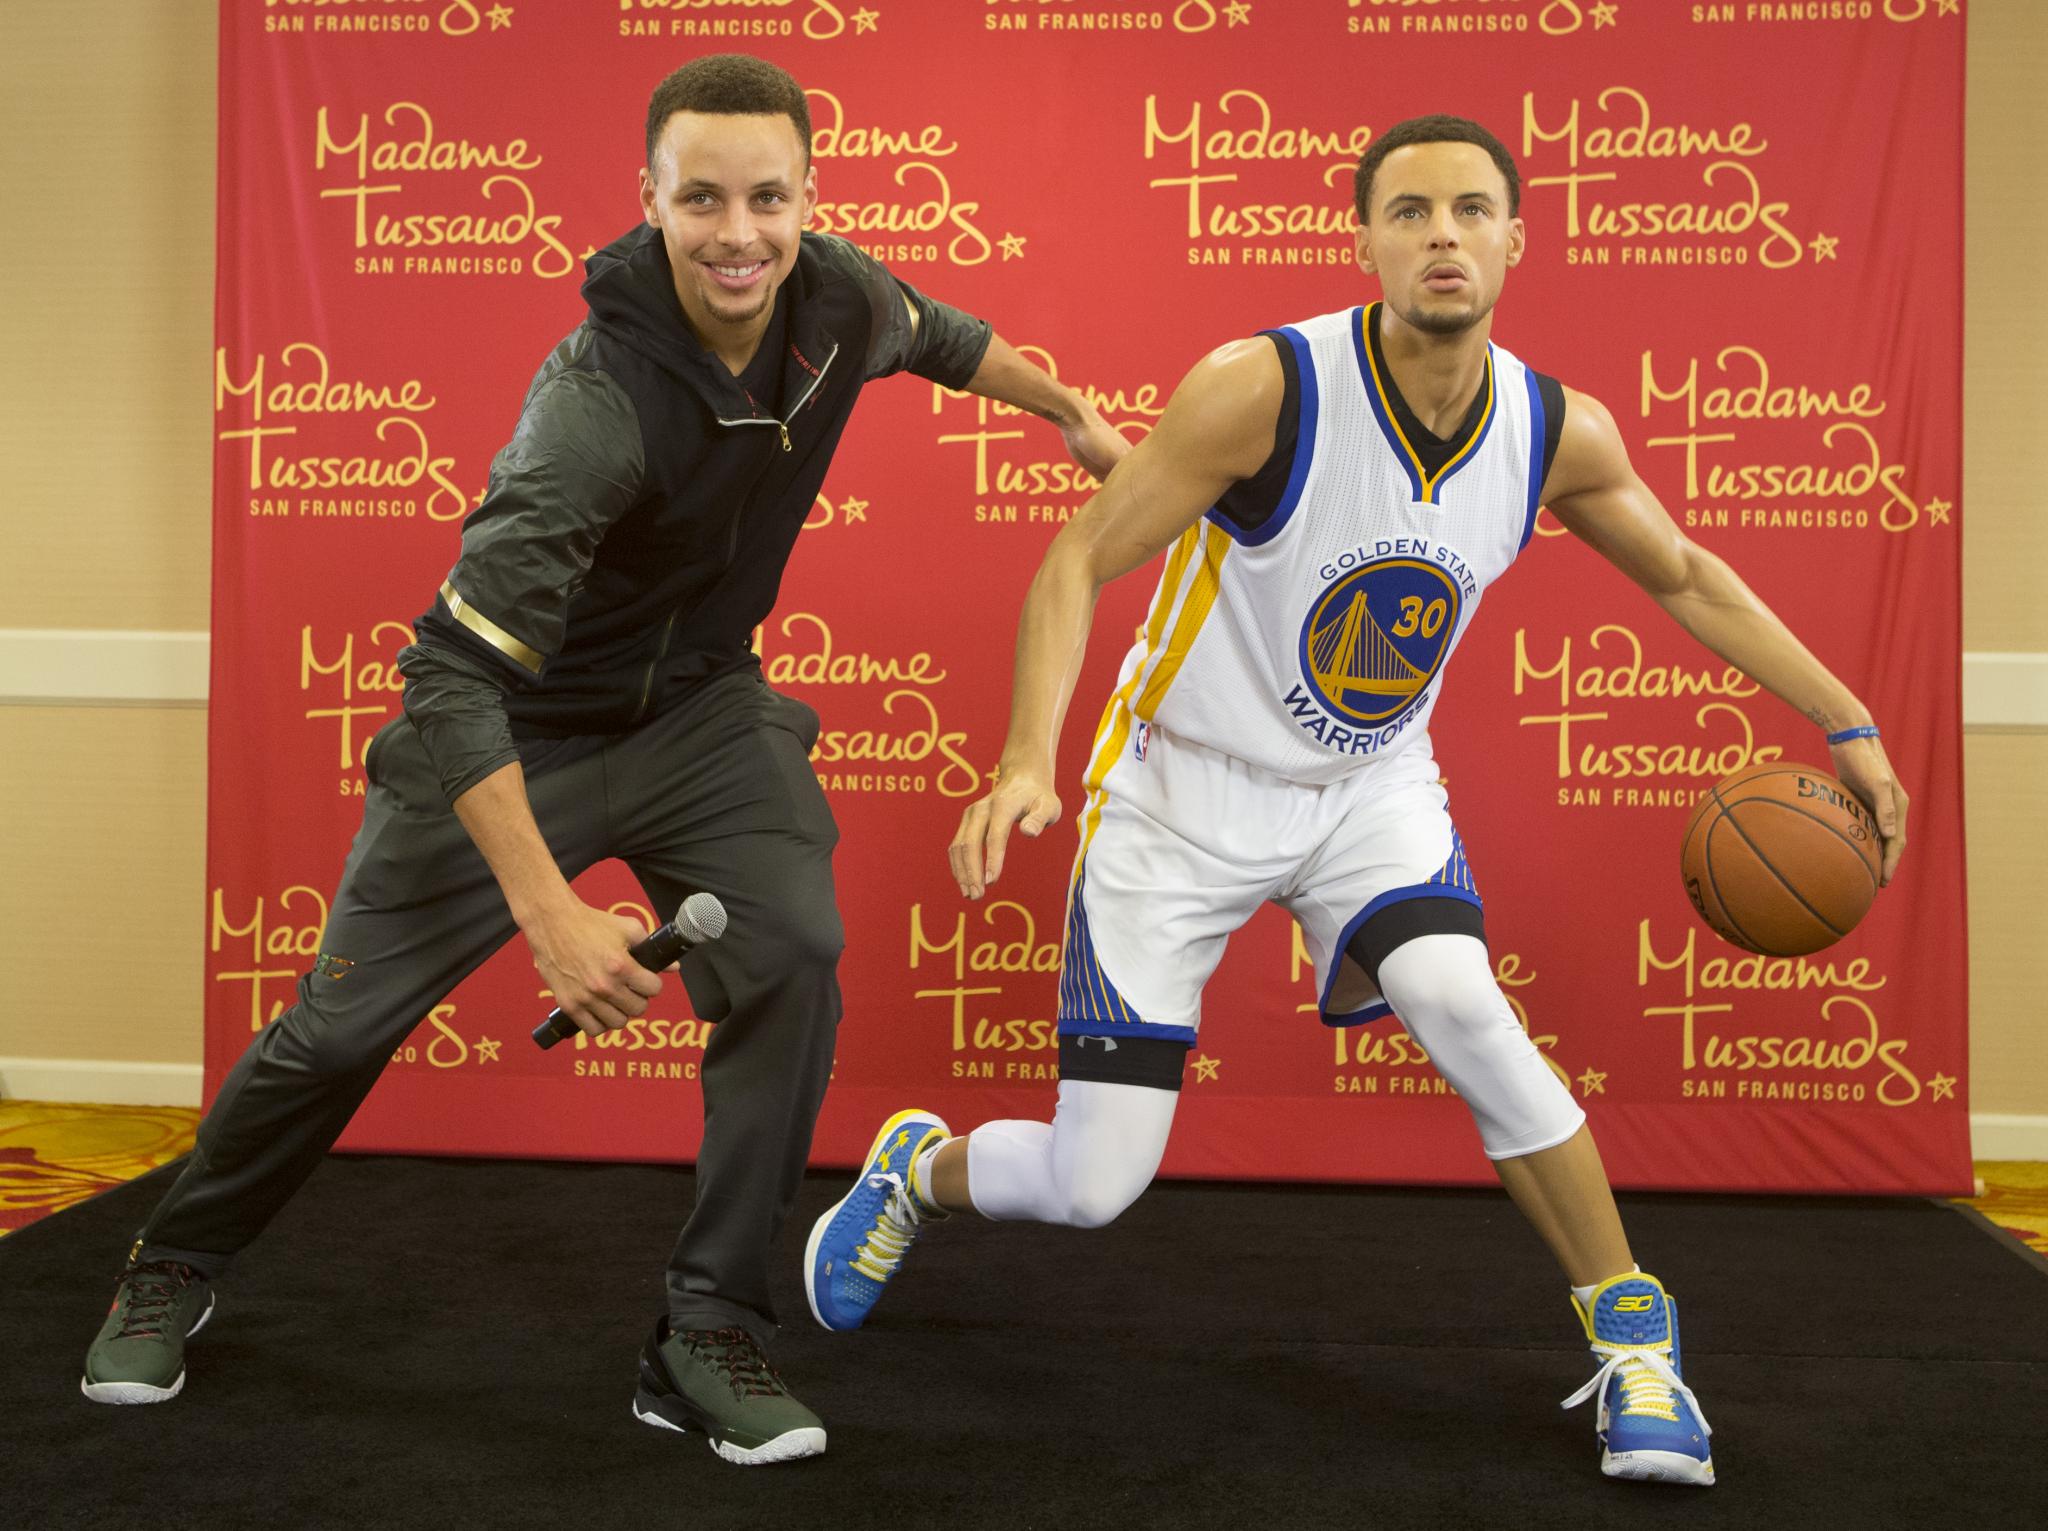 Steph Curry Gets a Wax Figure at Madame Tussauds